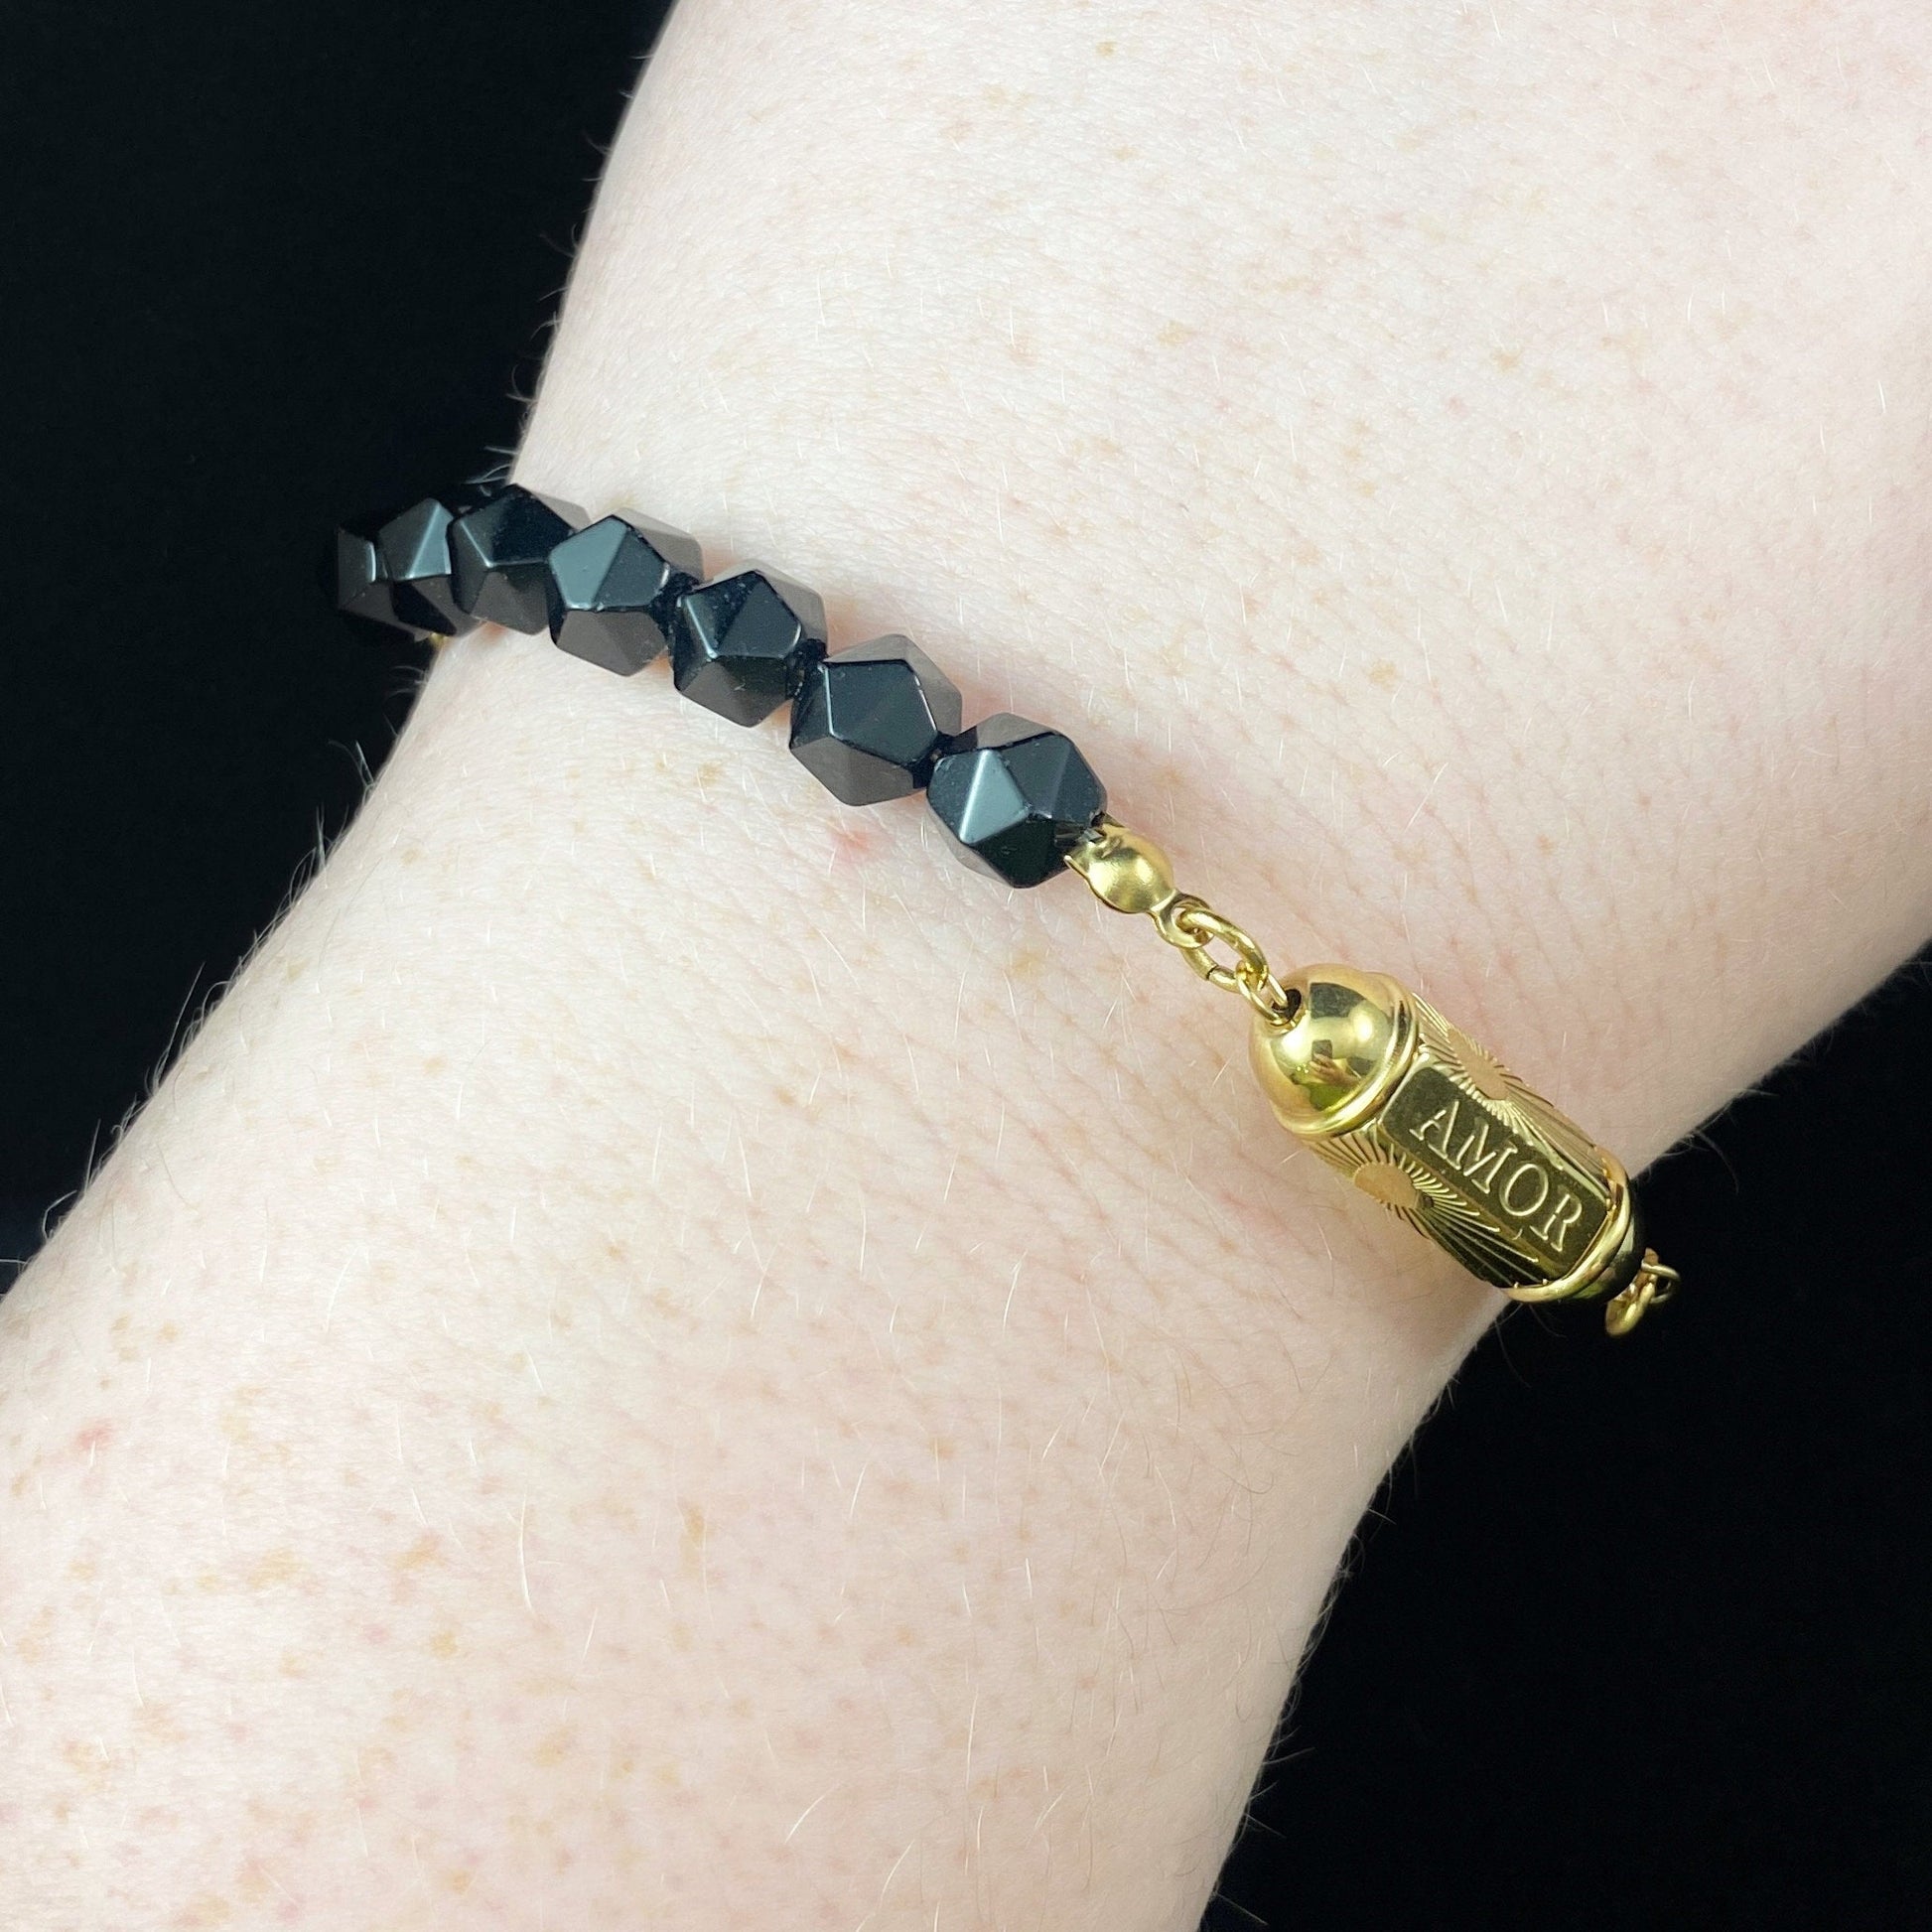 Black Natural Stone Bracelet with Love/Amor Calligraphy and Dainty Gold Heart Detailing